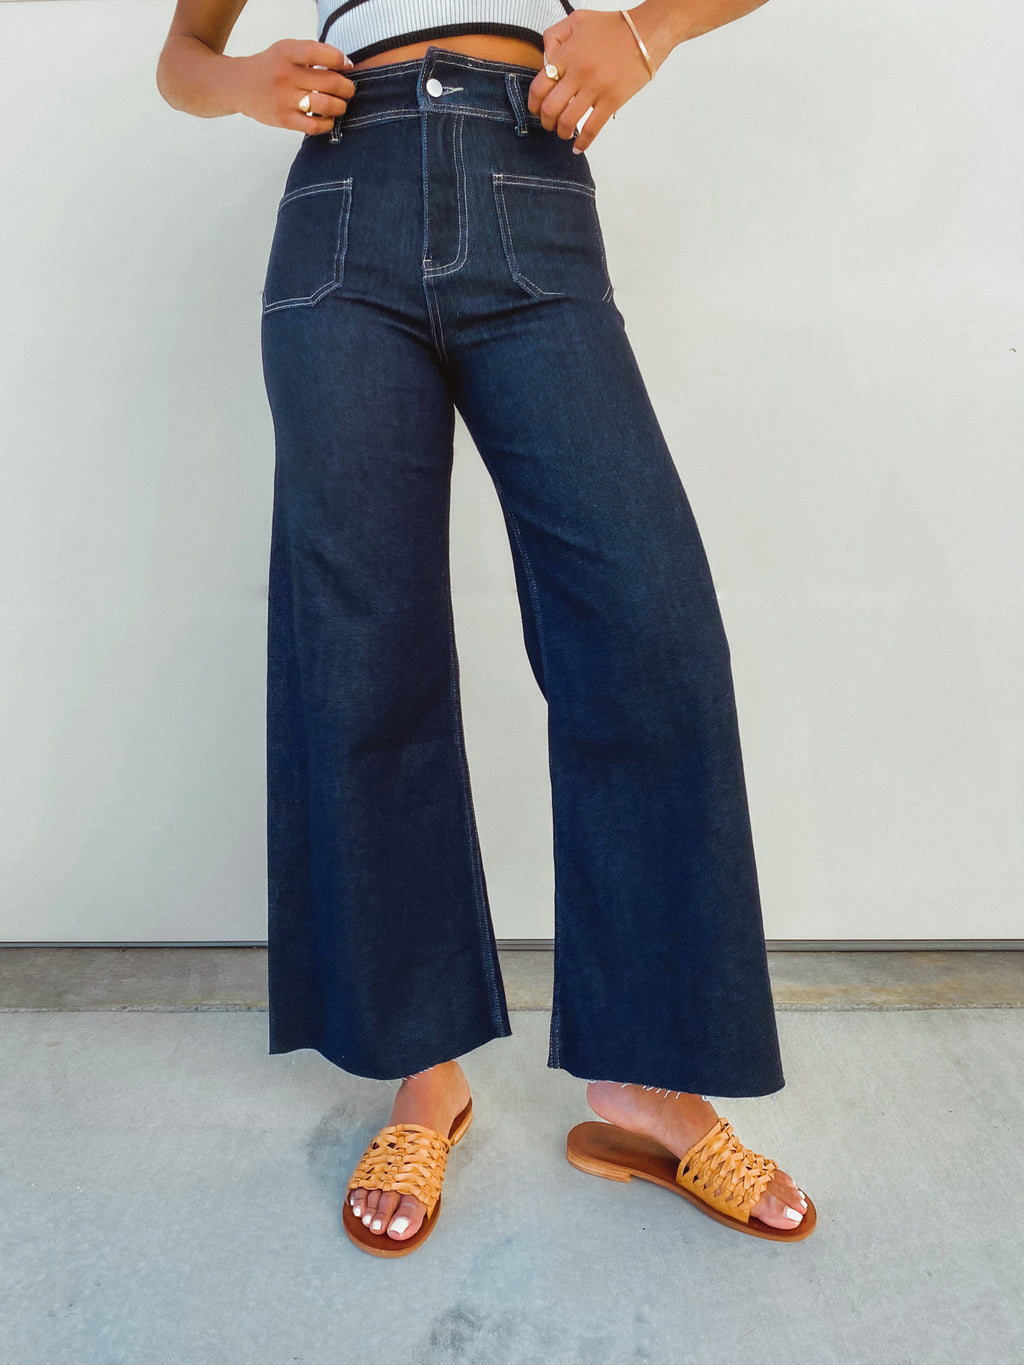 Seville High Rise Jeans - Stitch And Feather